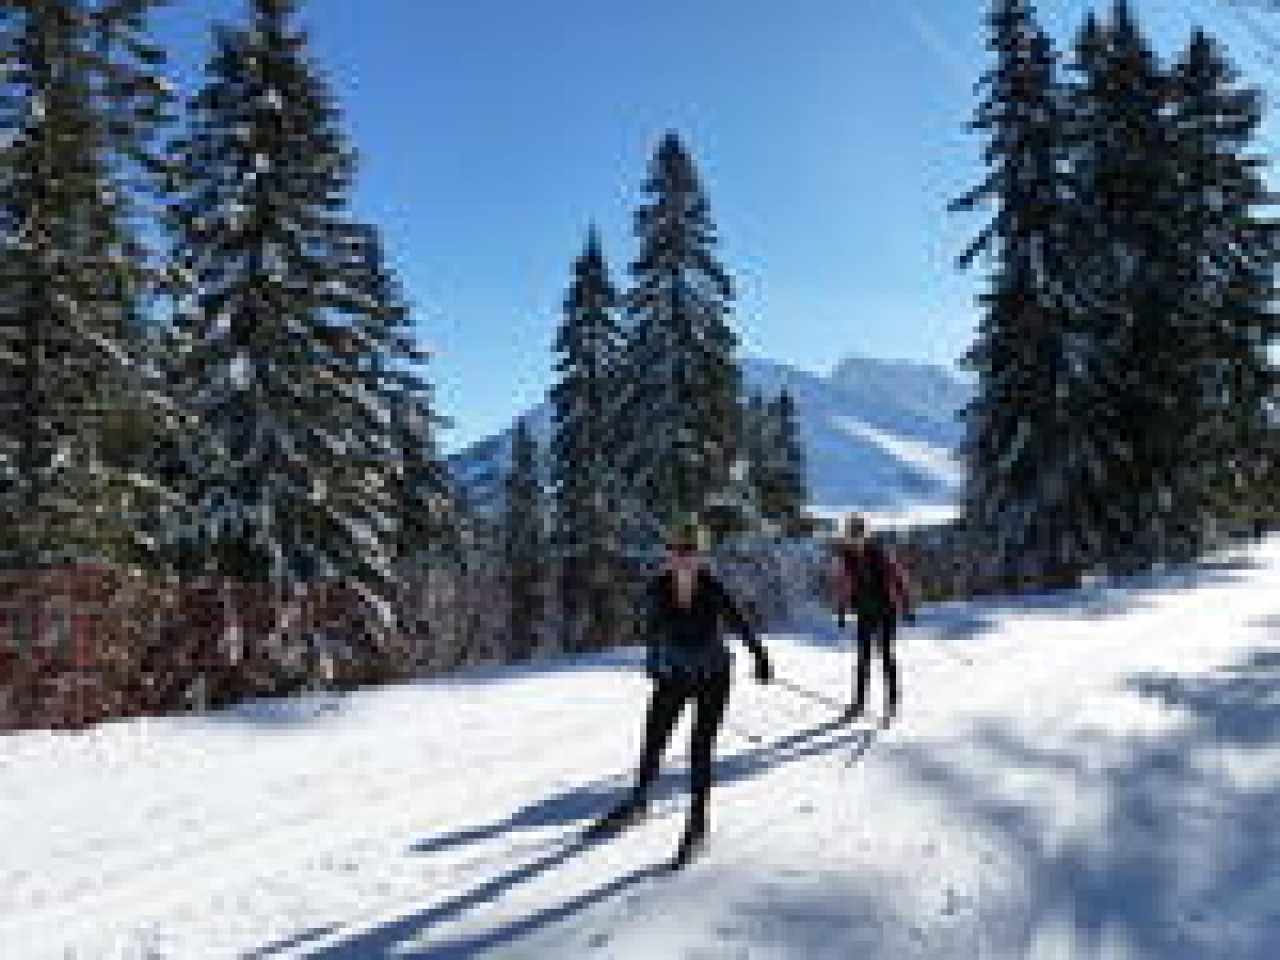 Two NEW snowshoe trips